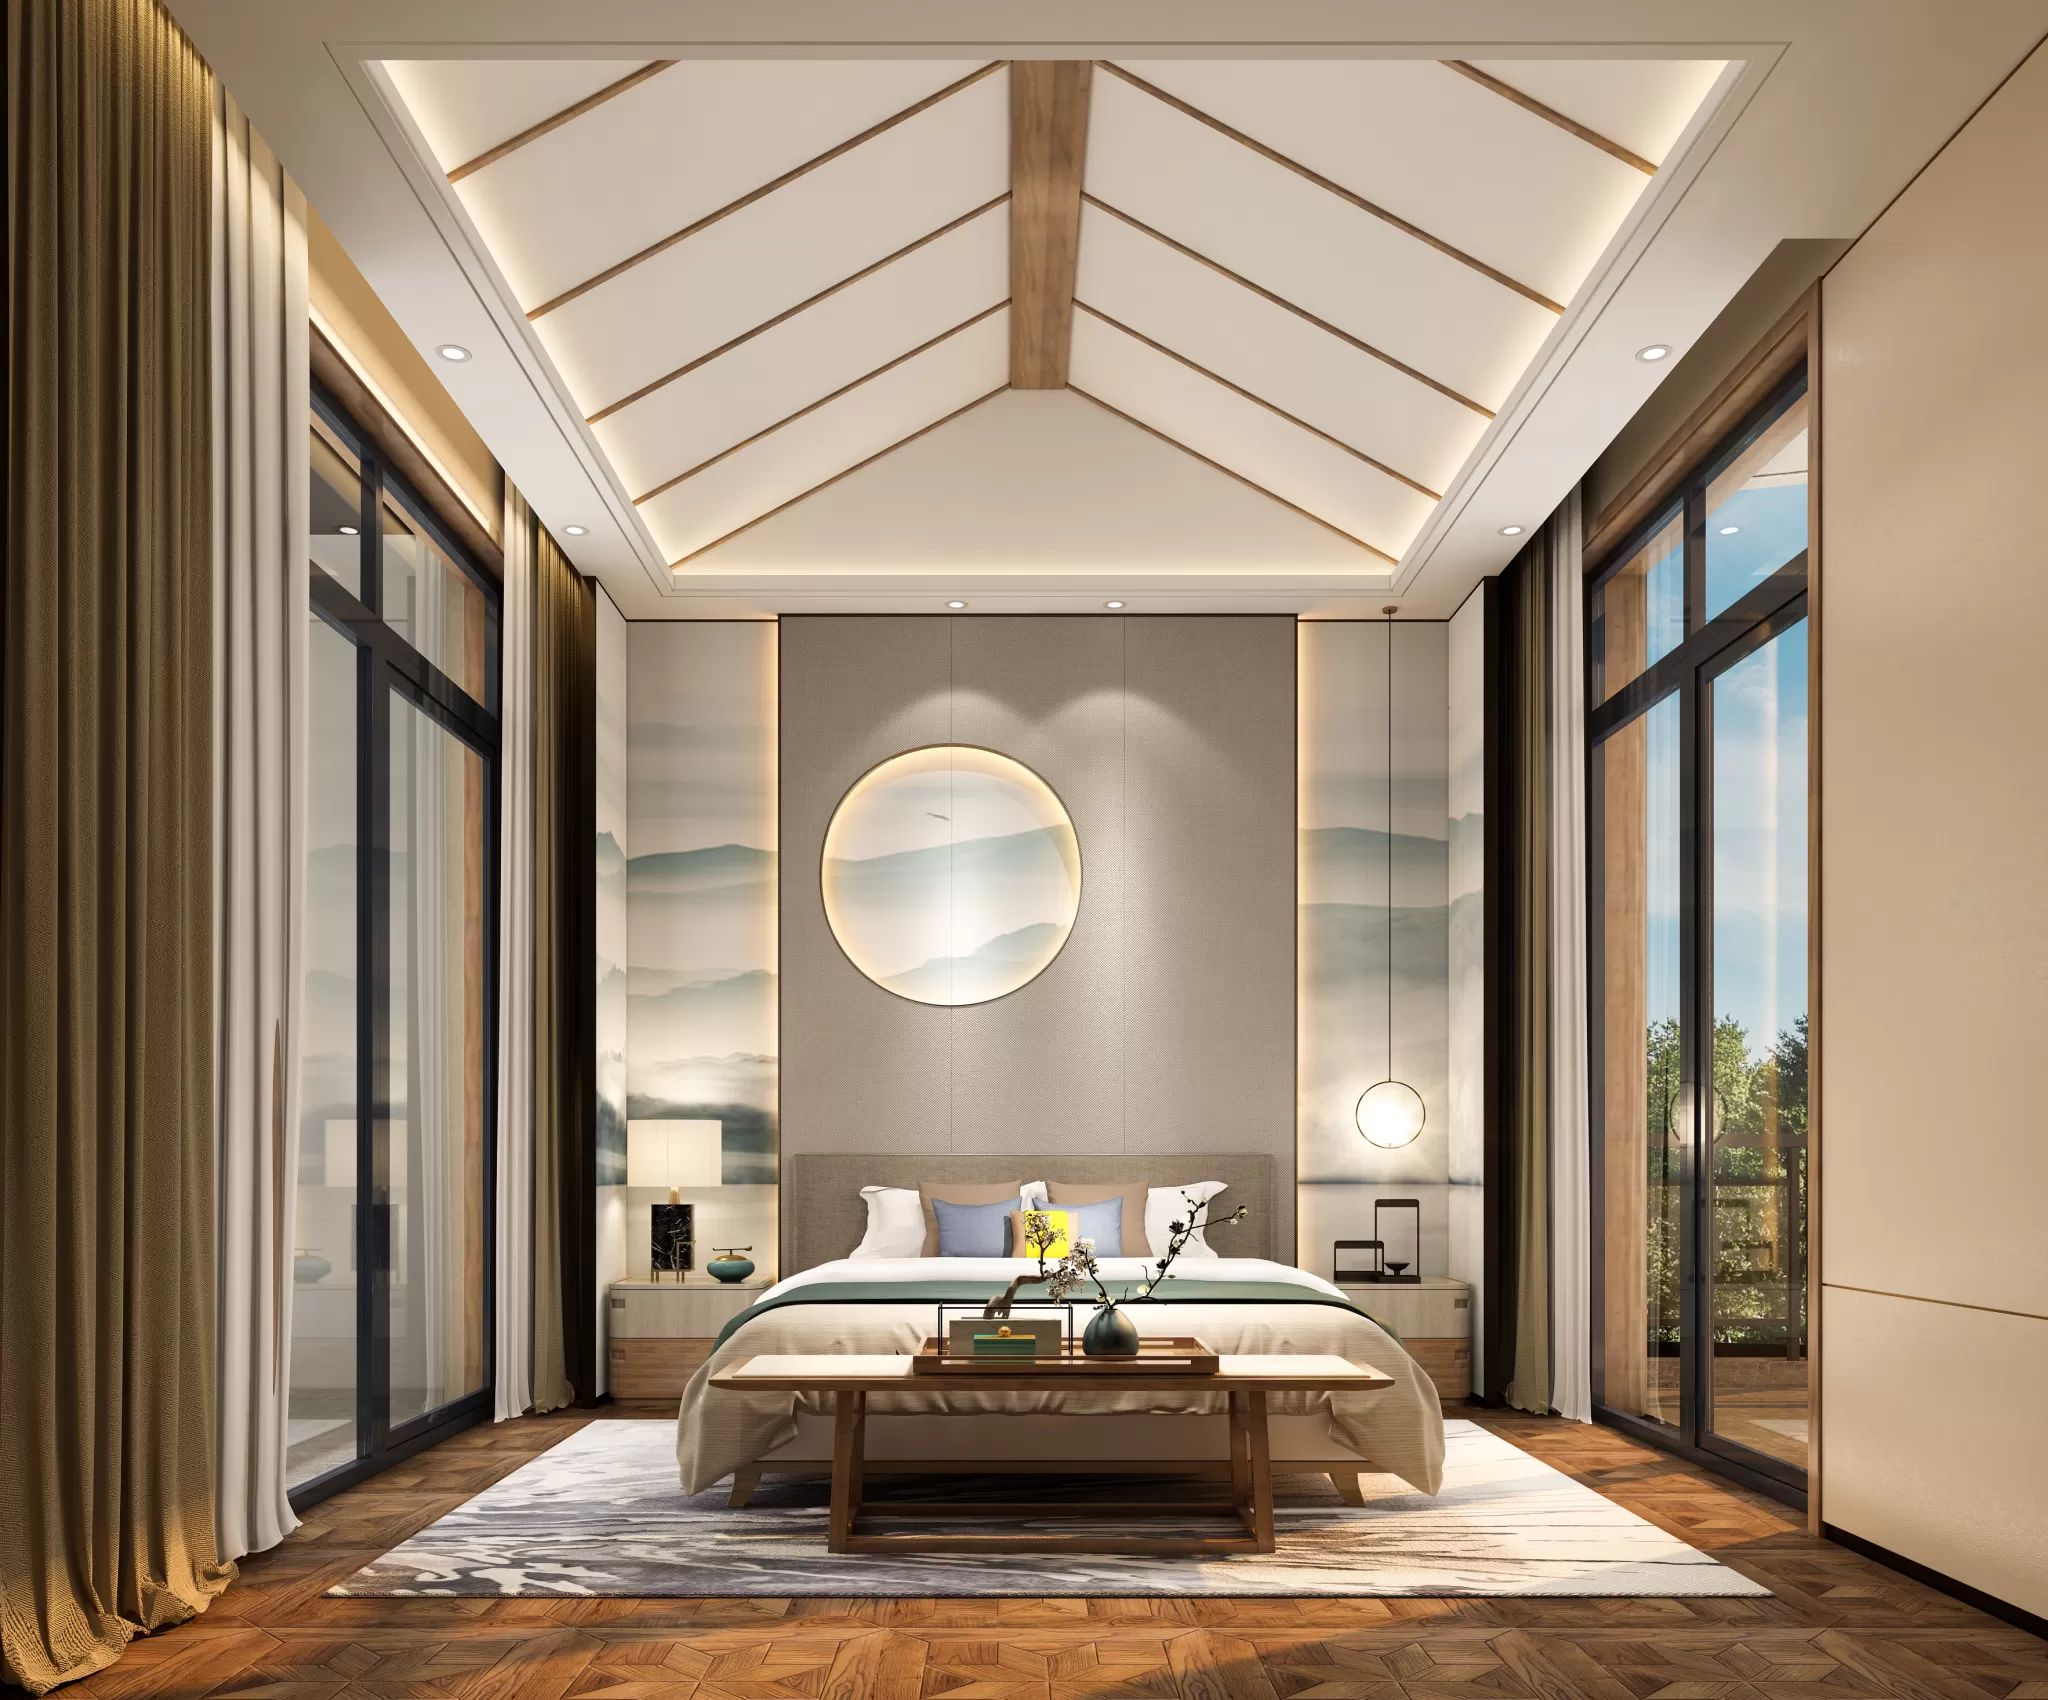 DESMOD INTERIOR 2021 (VRAY)/5. BEDROOM – 2. CHINESE STYLES – 062